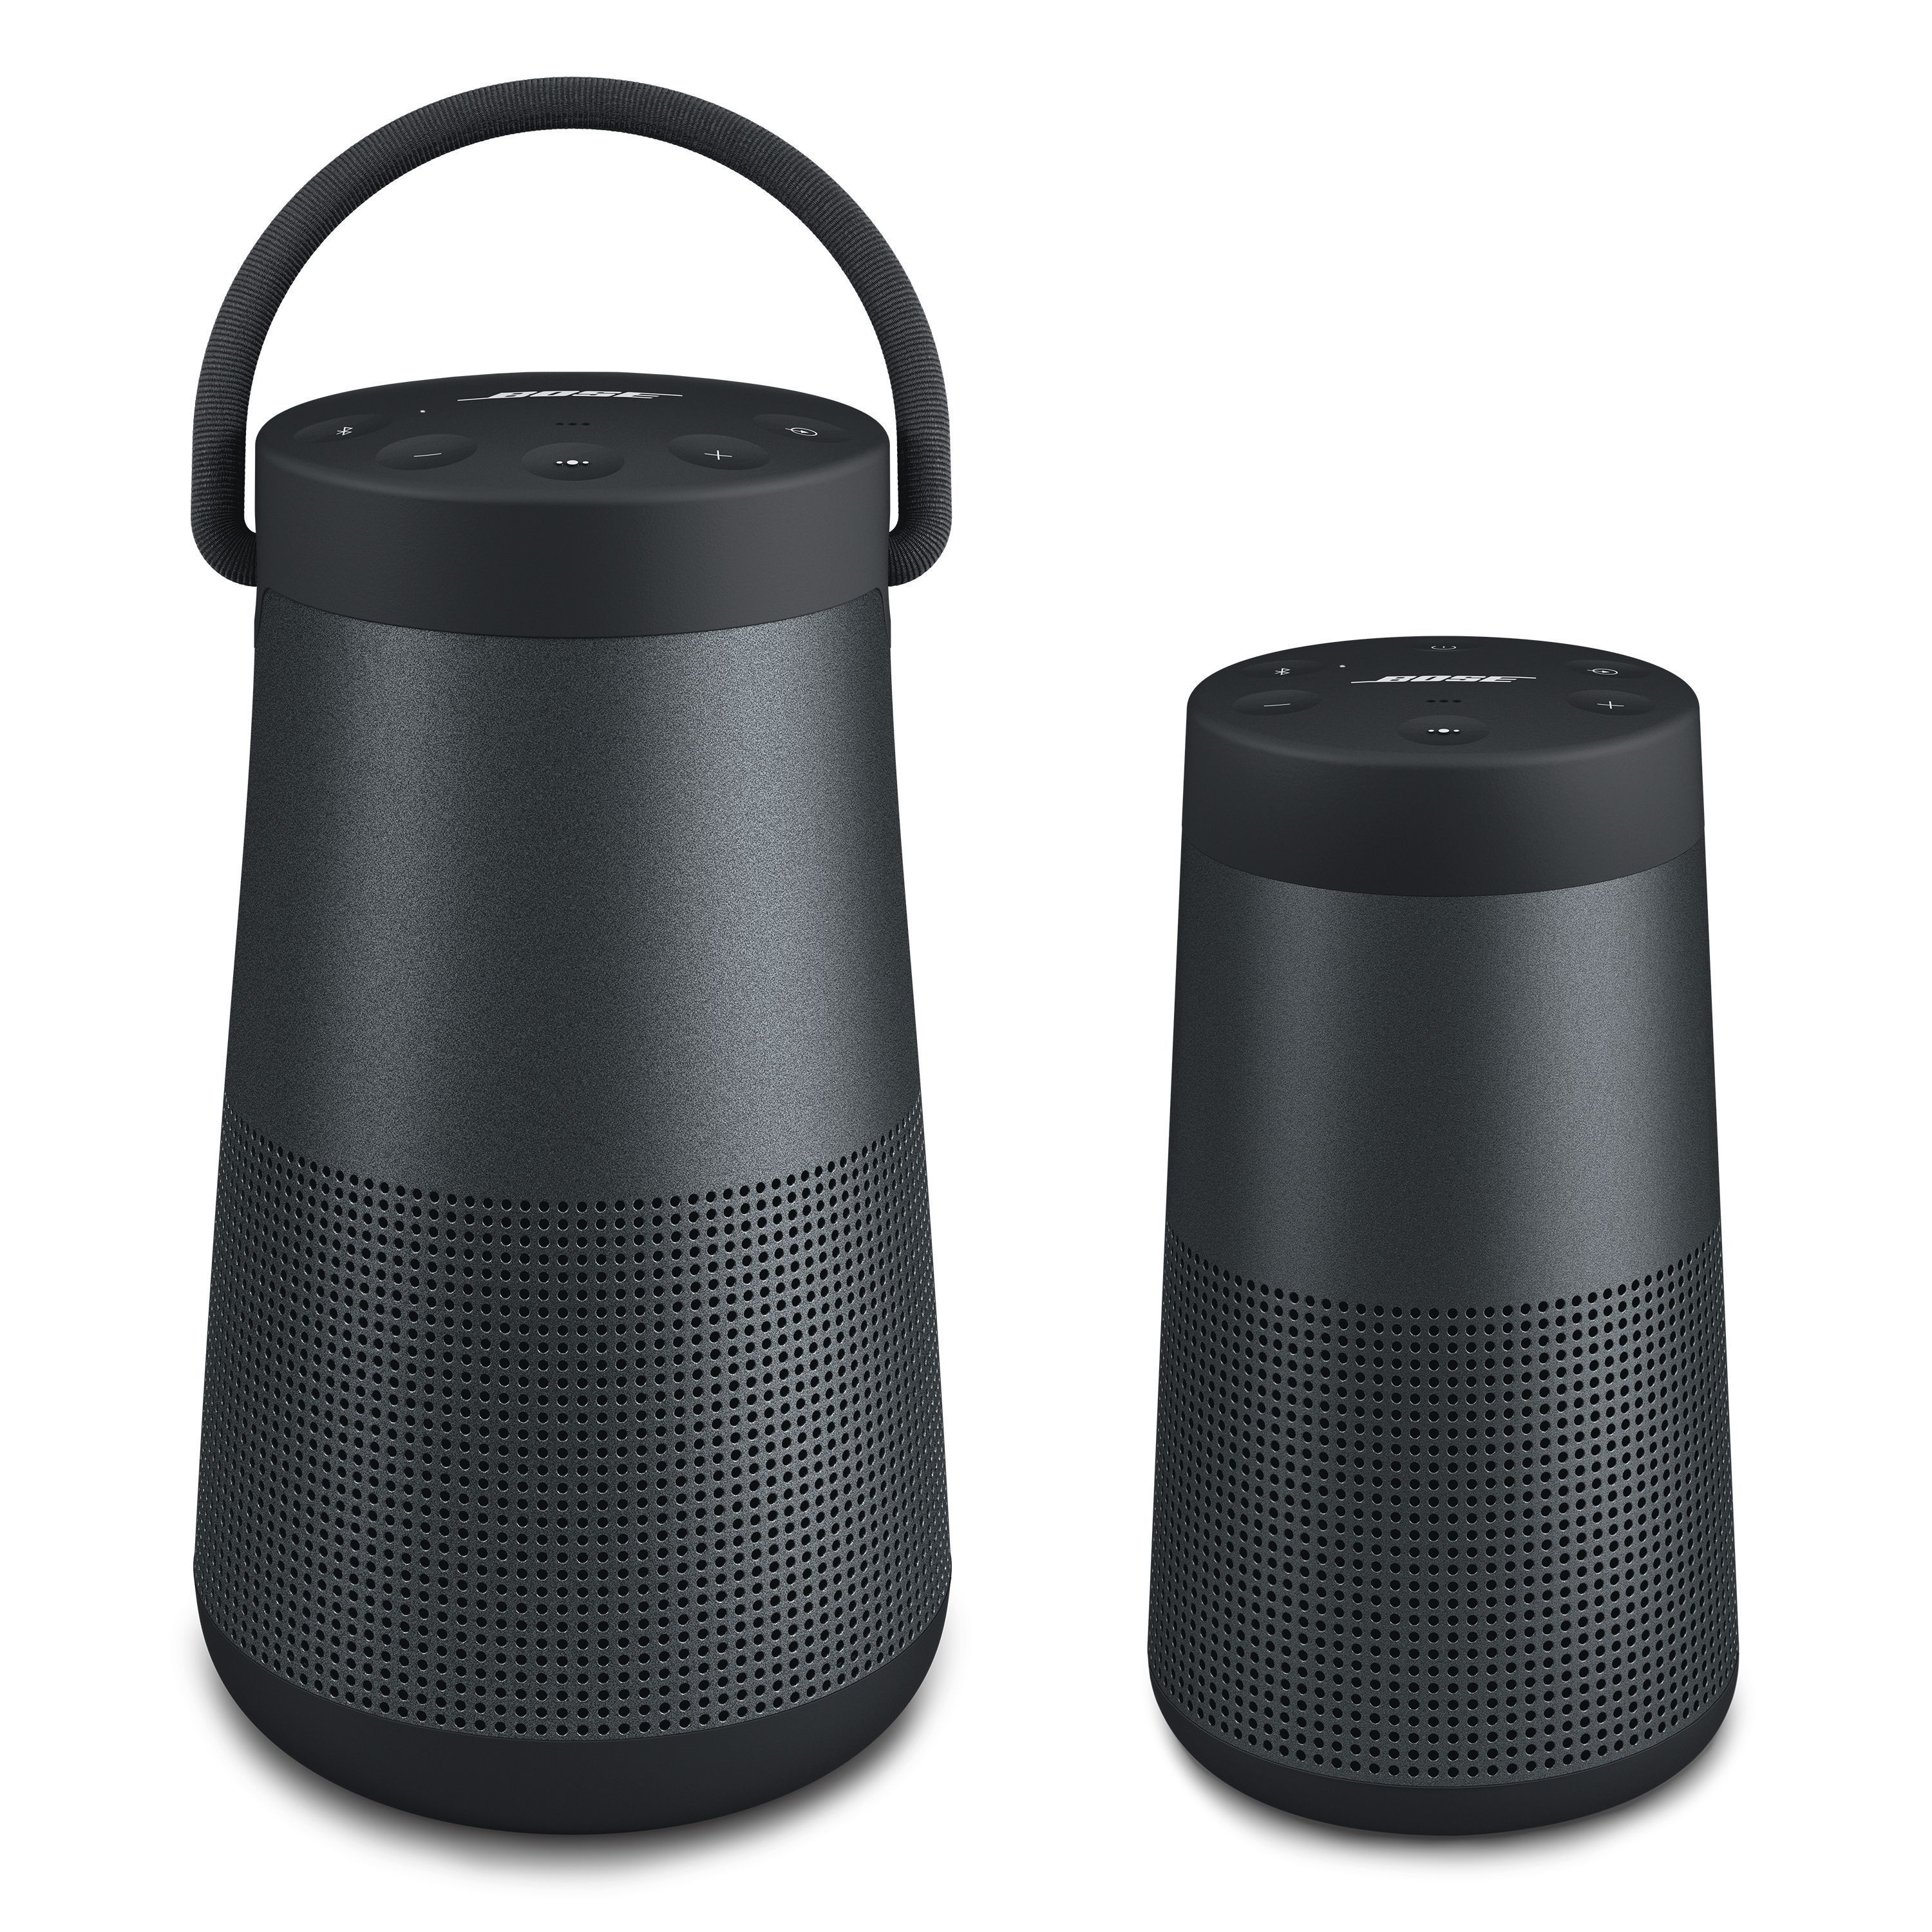 Bose releases two new 360 speakers: Revolve and Revolve Plus